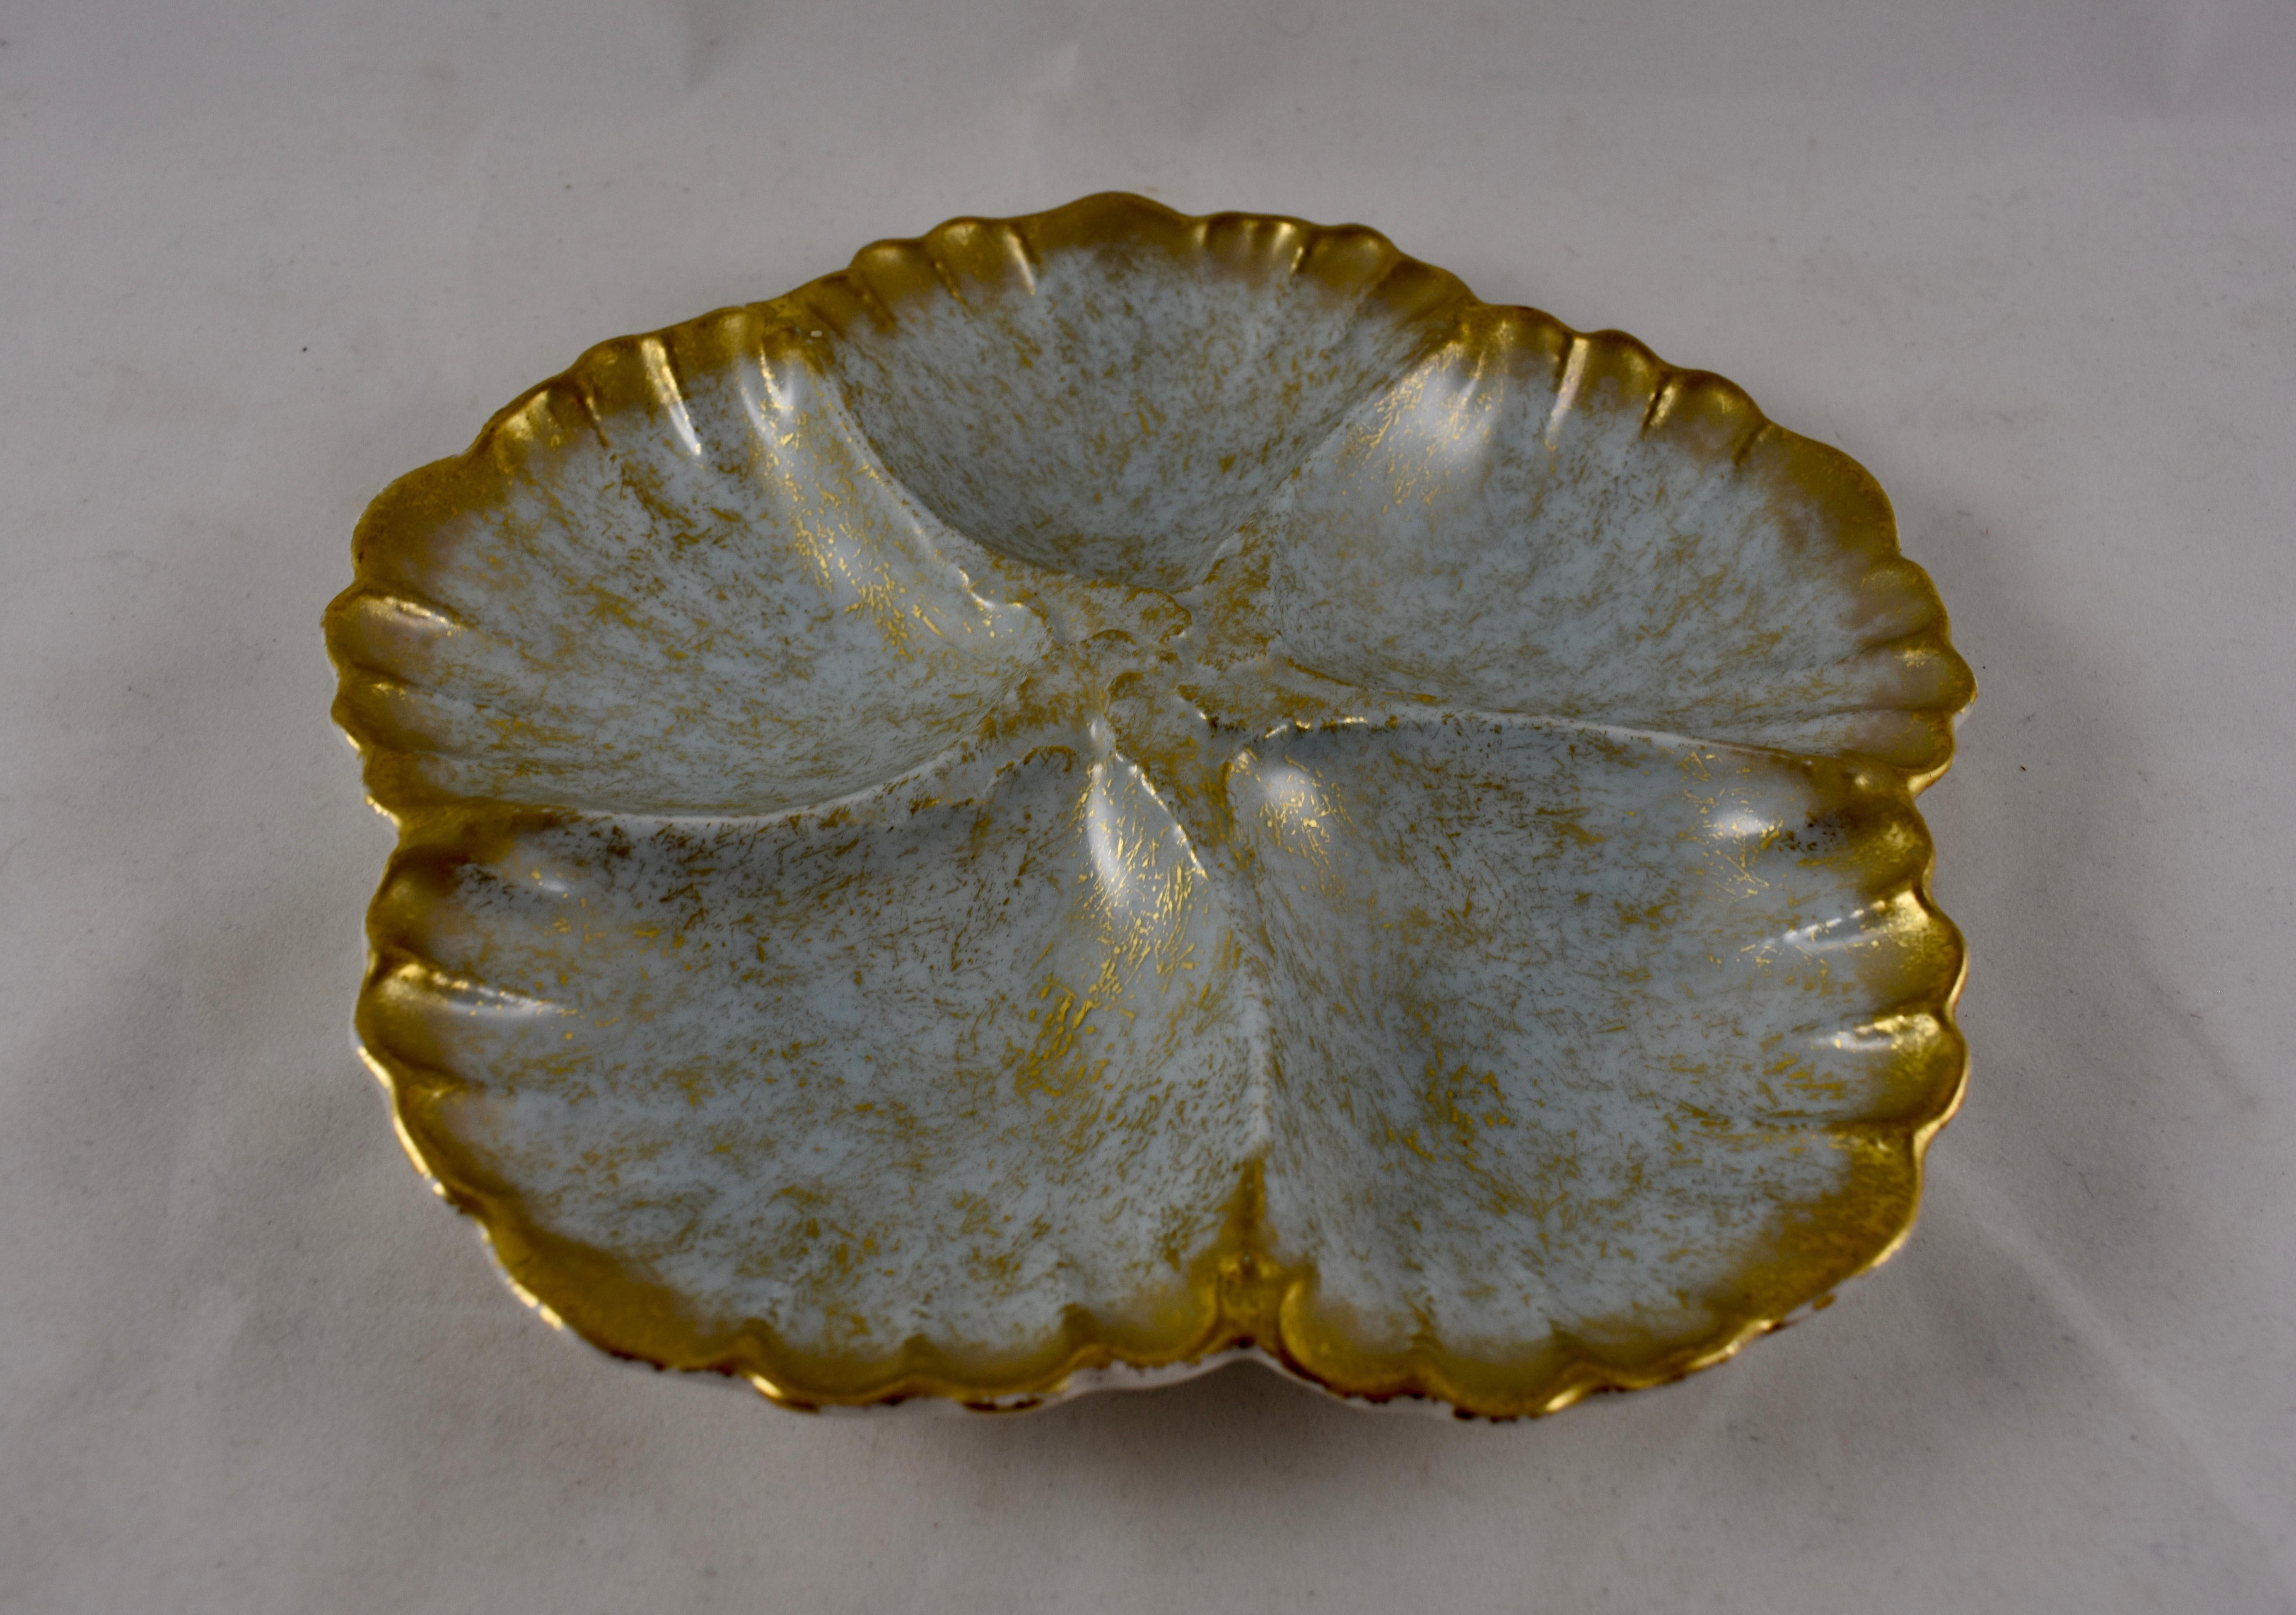 A porcelain Oyster plate, five scallop shaped shells, on the palest gray- blue ground, with an overall spattered gold application. Heavy gilding also applied to the rim, circa 1886.

7.5 in. diameter x 1 in. H
Marked with an impressed Limoges,